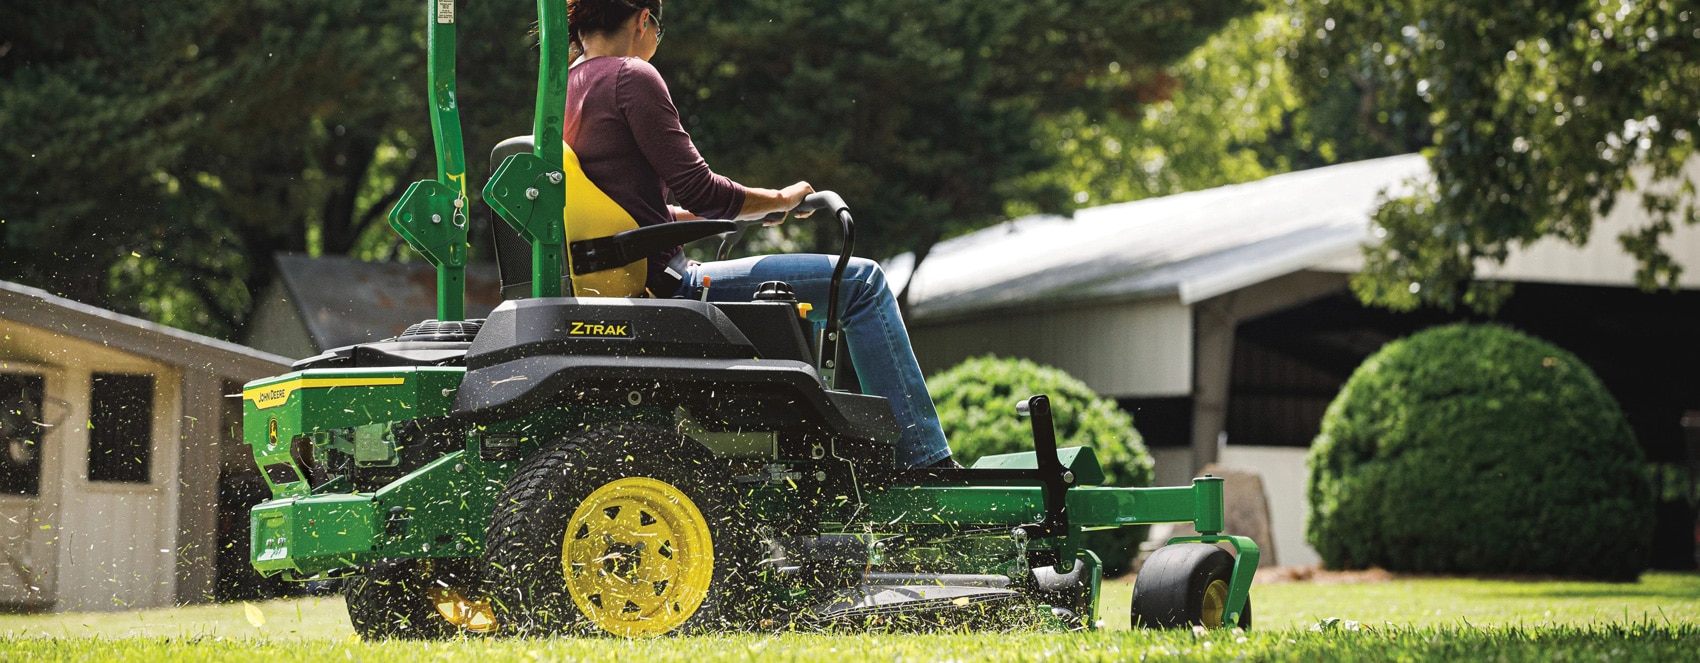 The ZTrak Zero-Turn Mowers are great for any residential mowing needs.